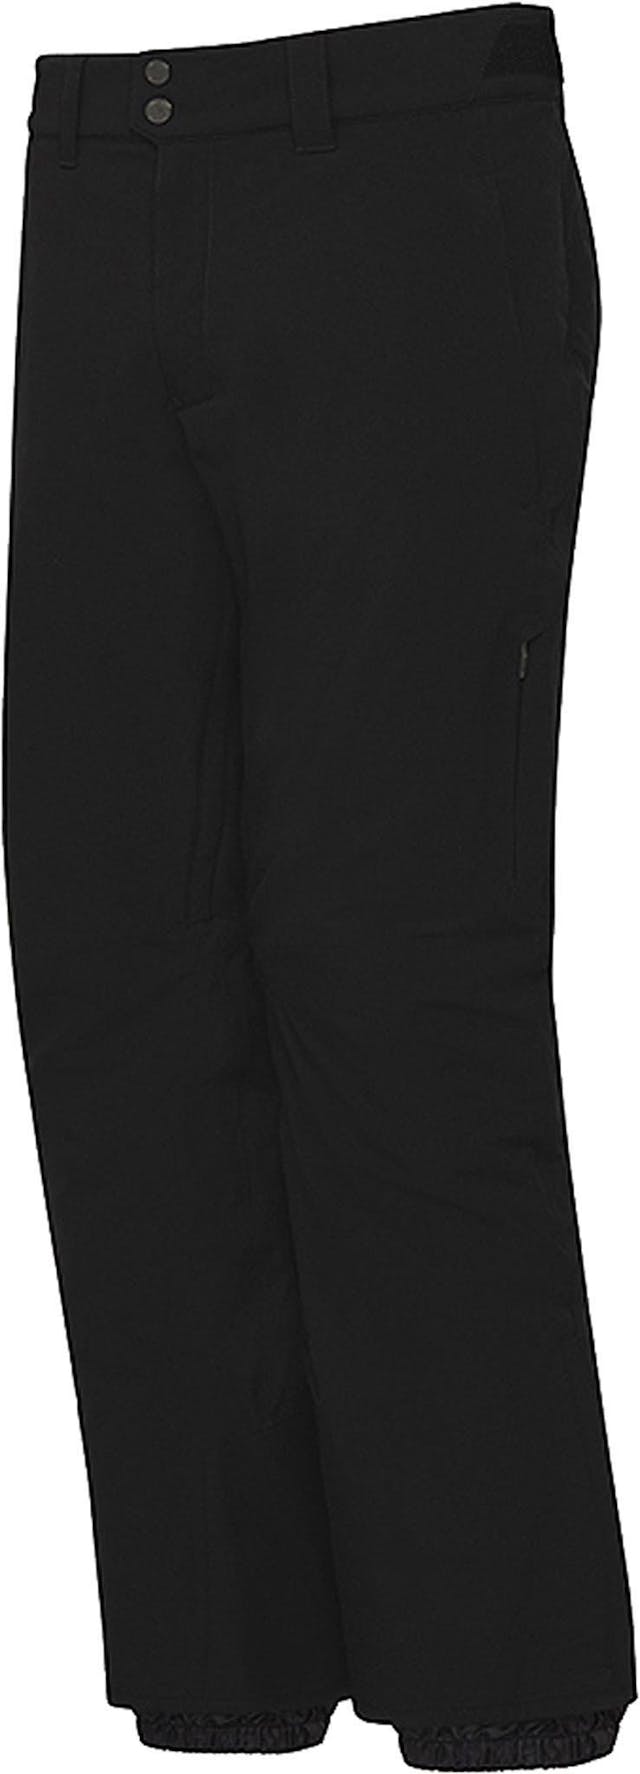 Product image for Crown Insulated Pant - Men's